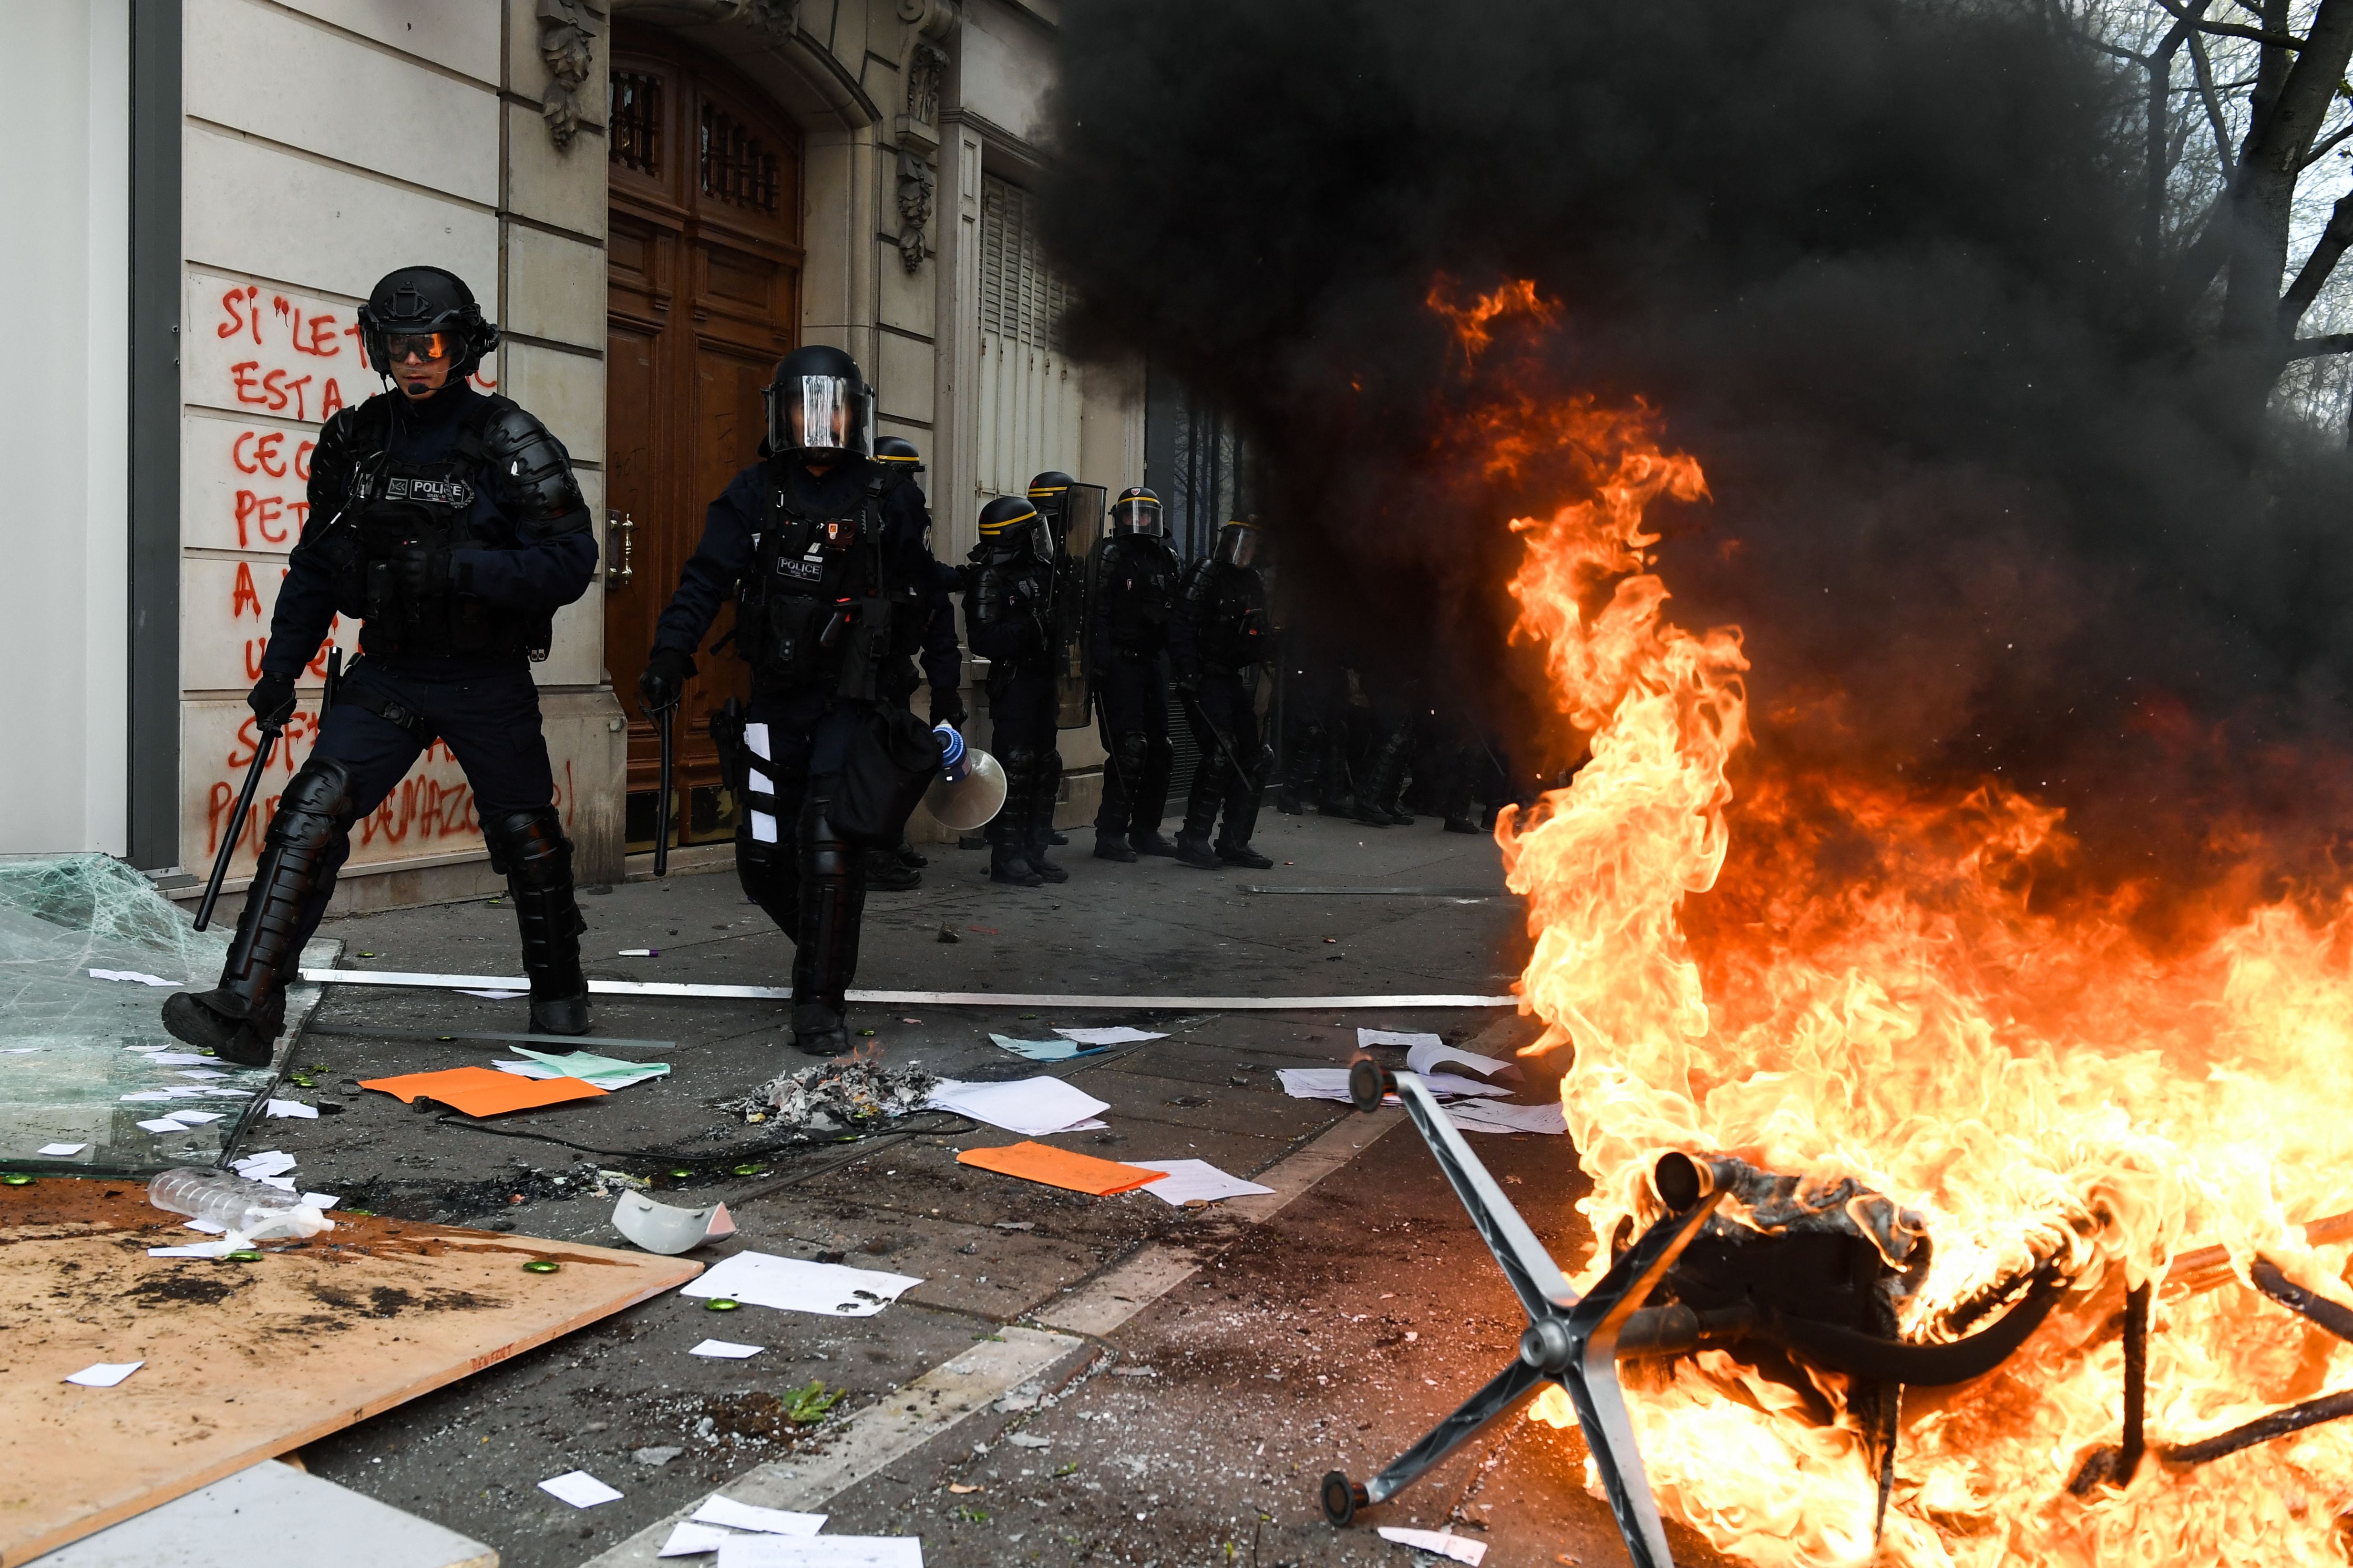 Protests in France: Pension reform calls day 11 in Paris